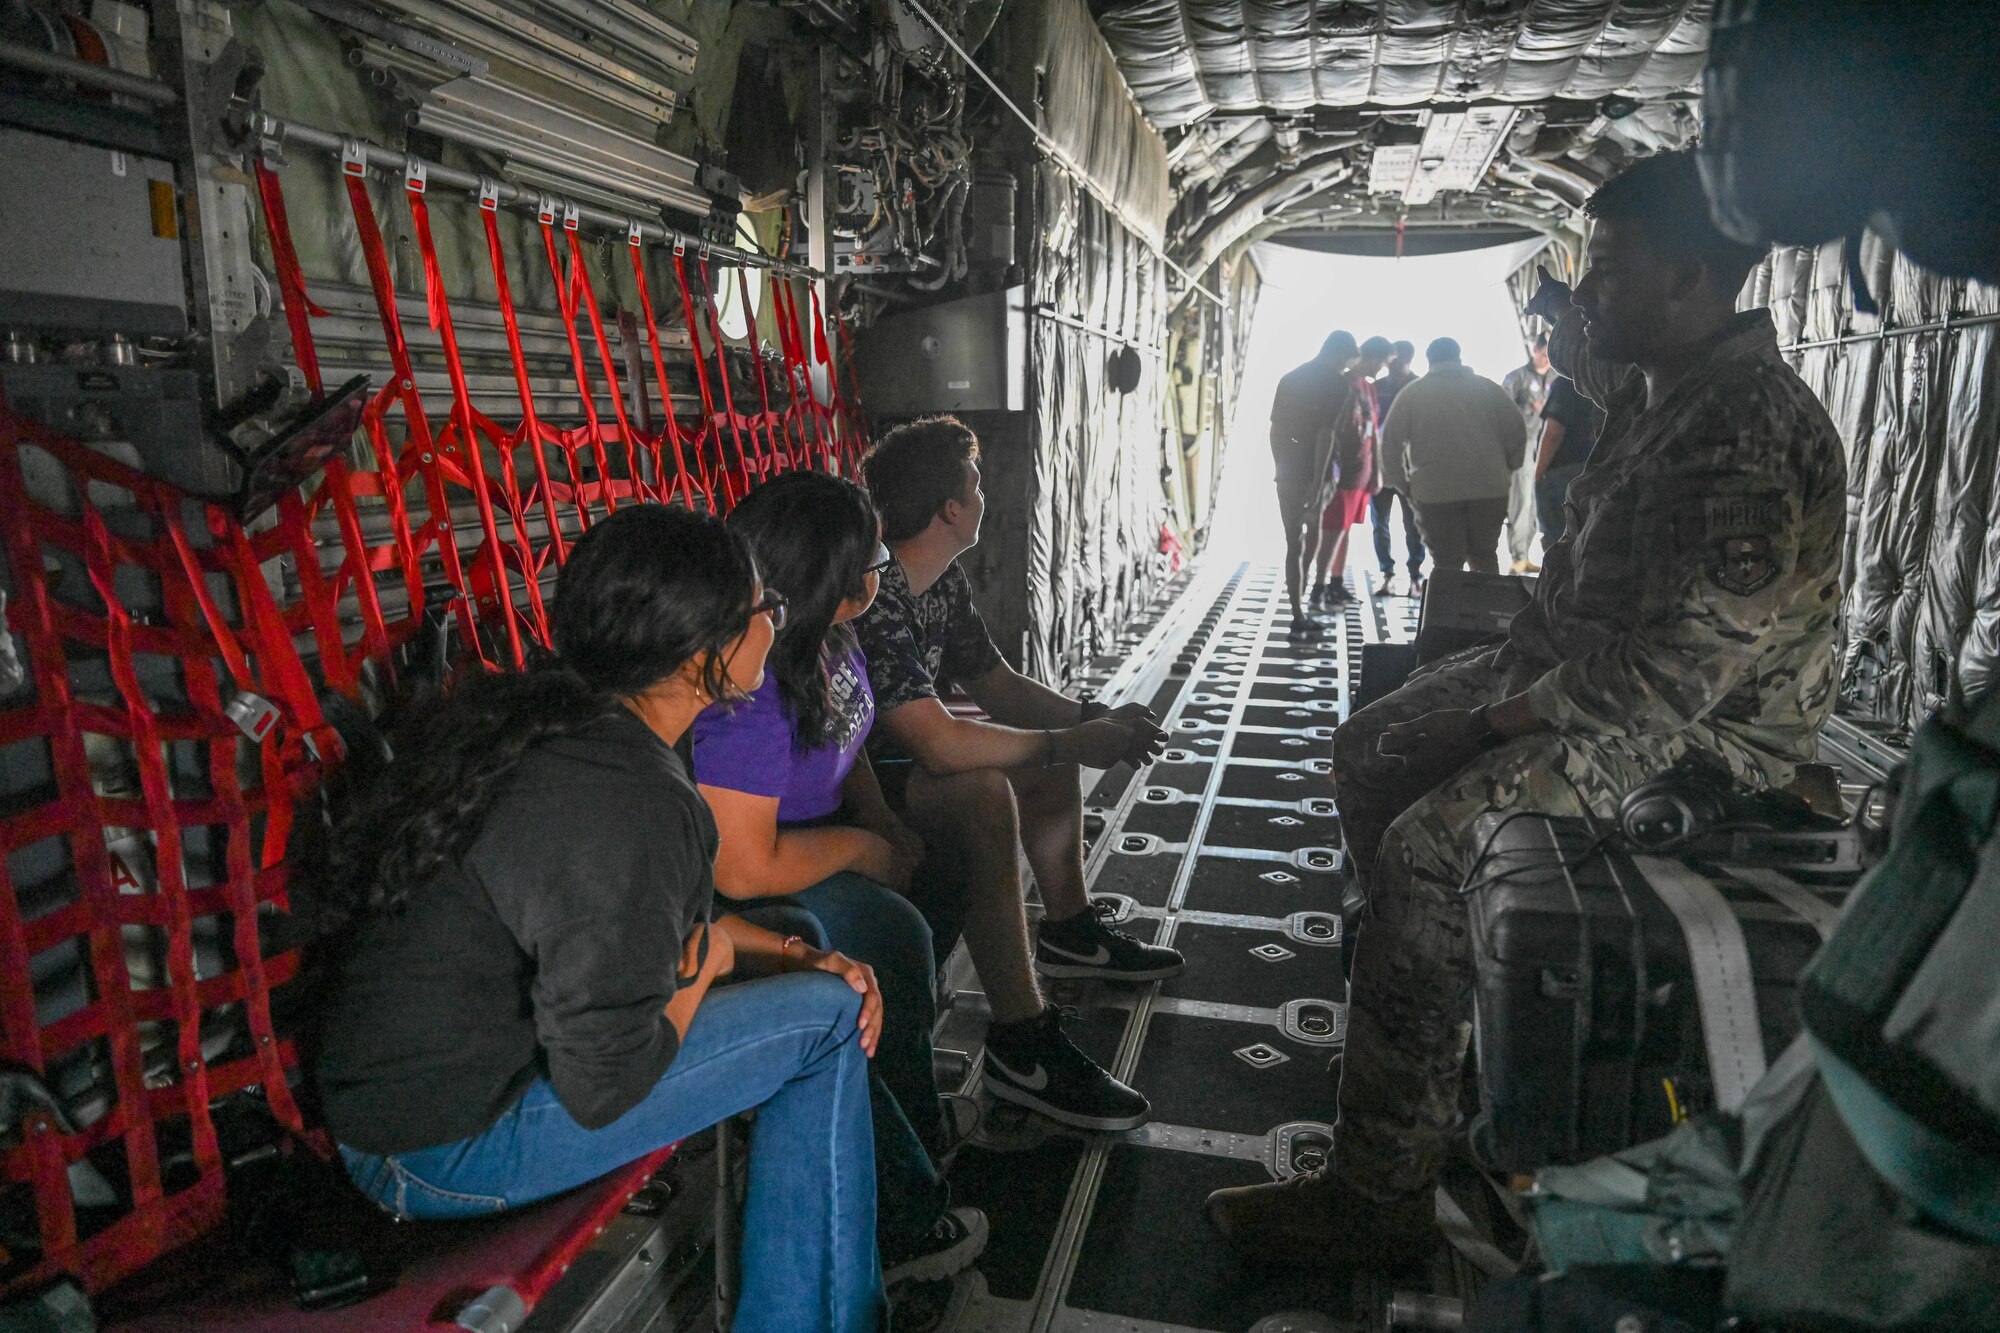 People sit inside an aircraft.